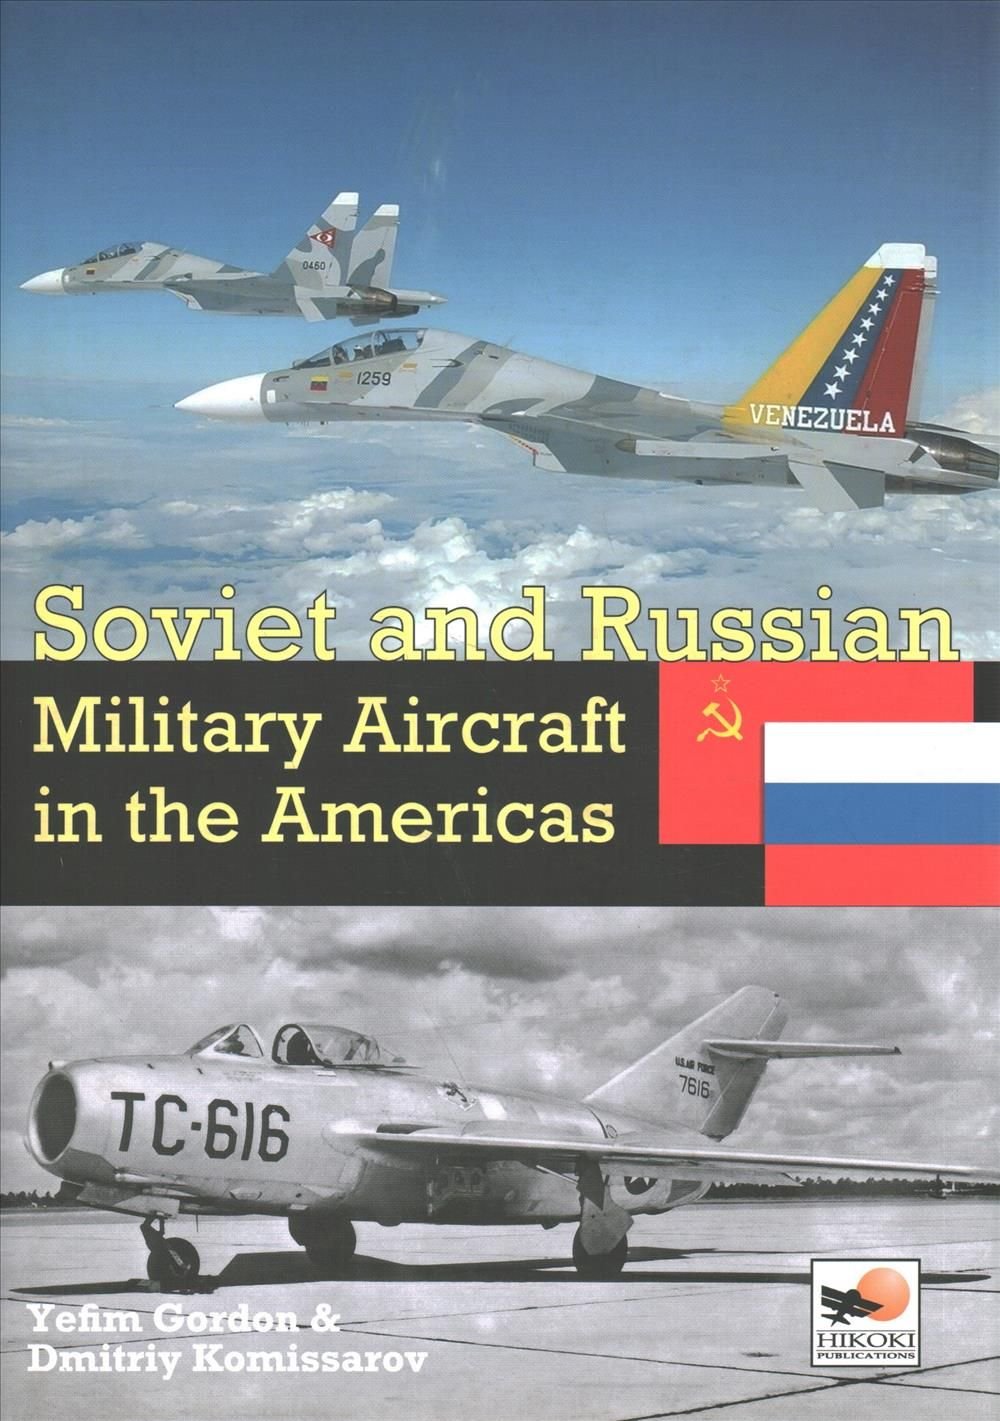 Buy Soviet and Russian Military Aircraft in the Americas by Yefim